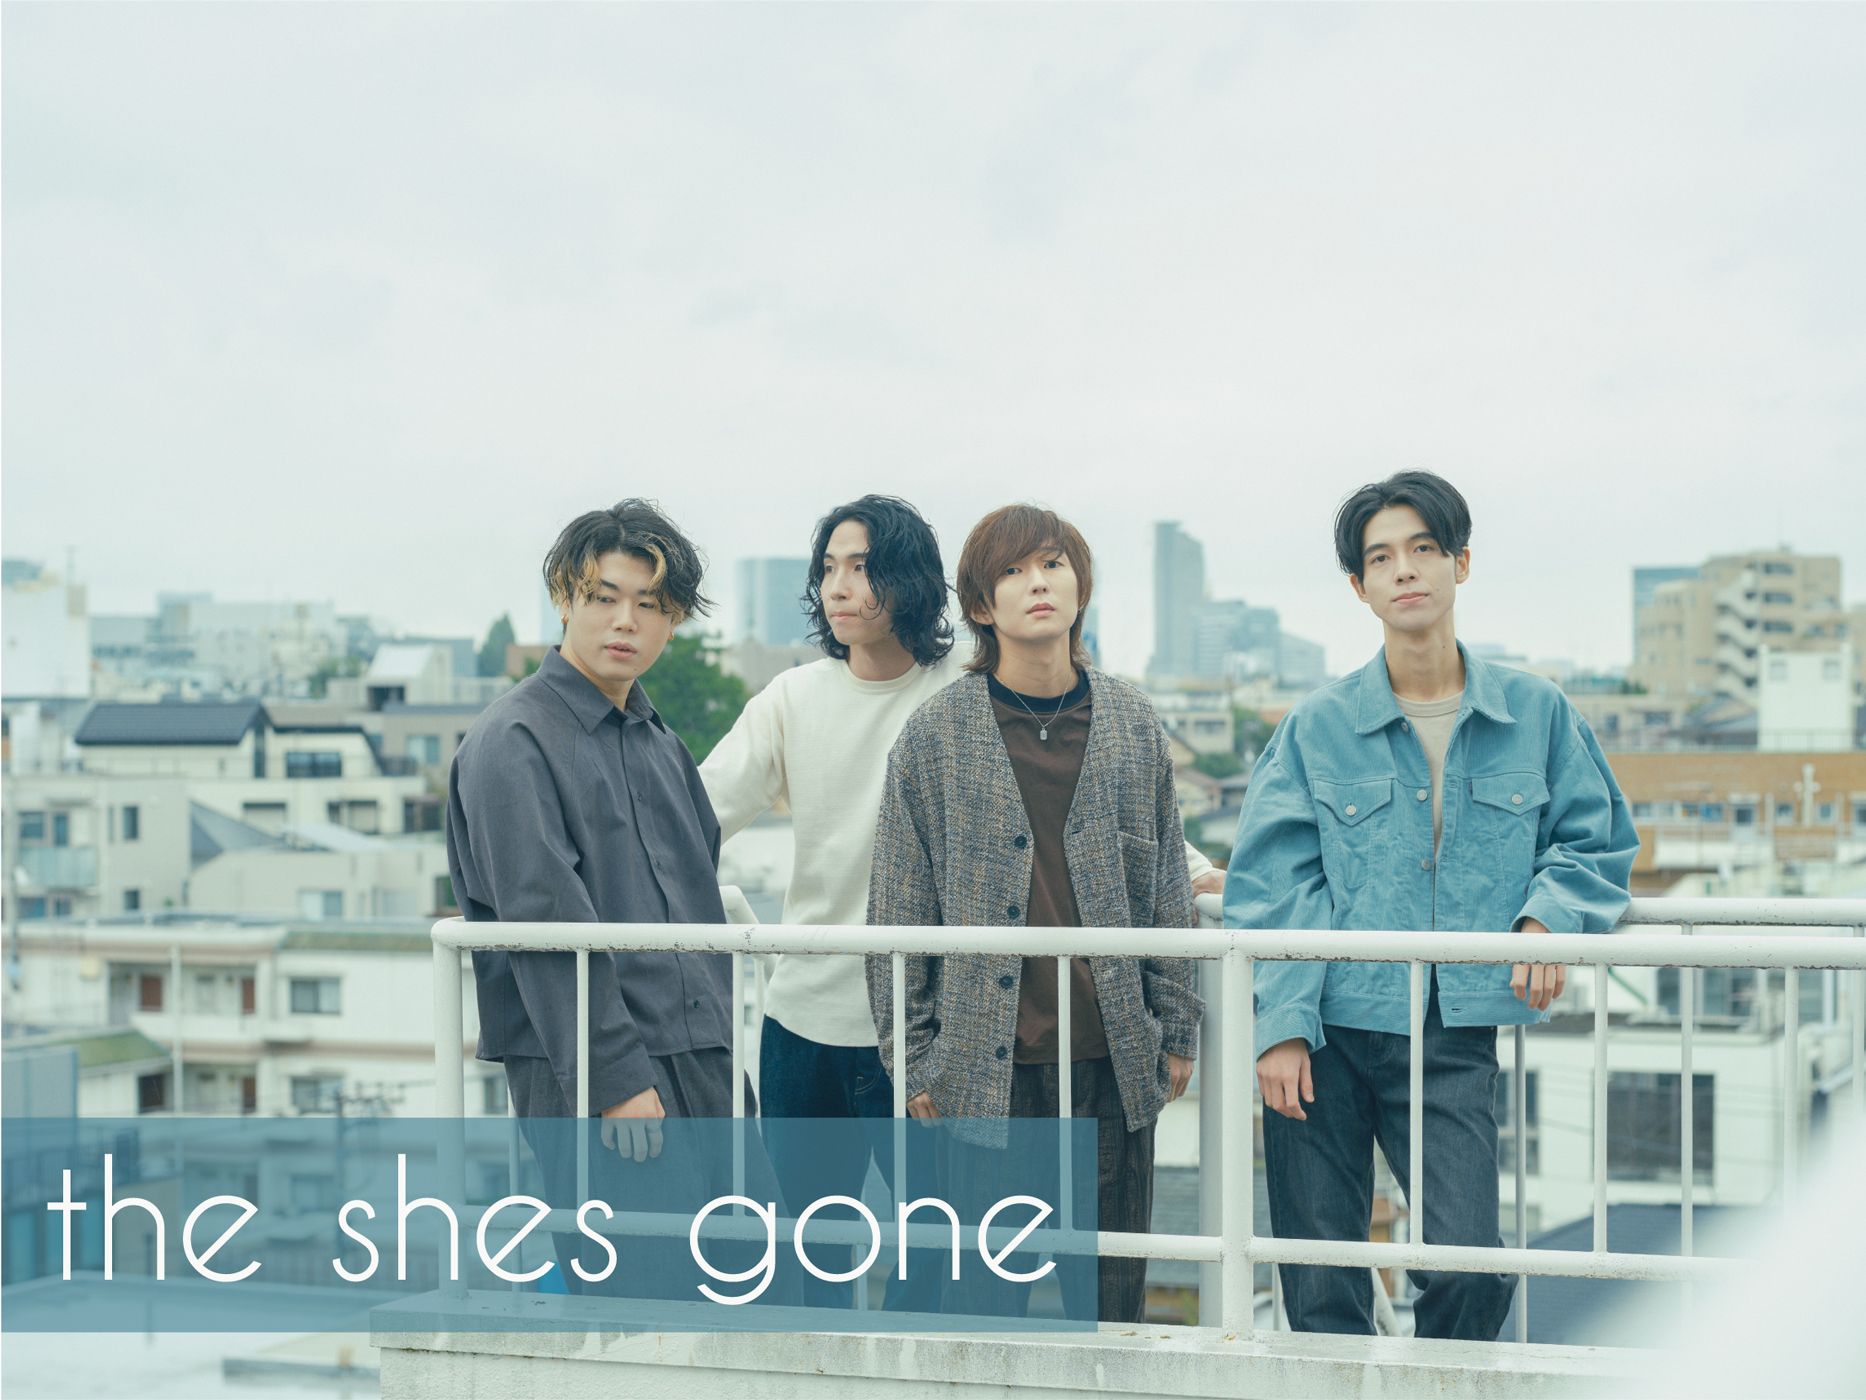 the shes gone│official fan club 「-apostrophes-」